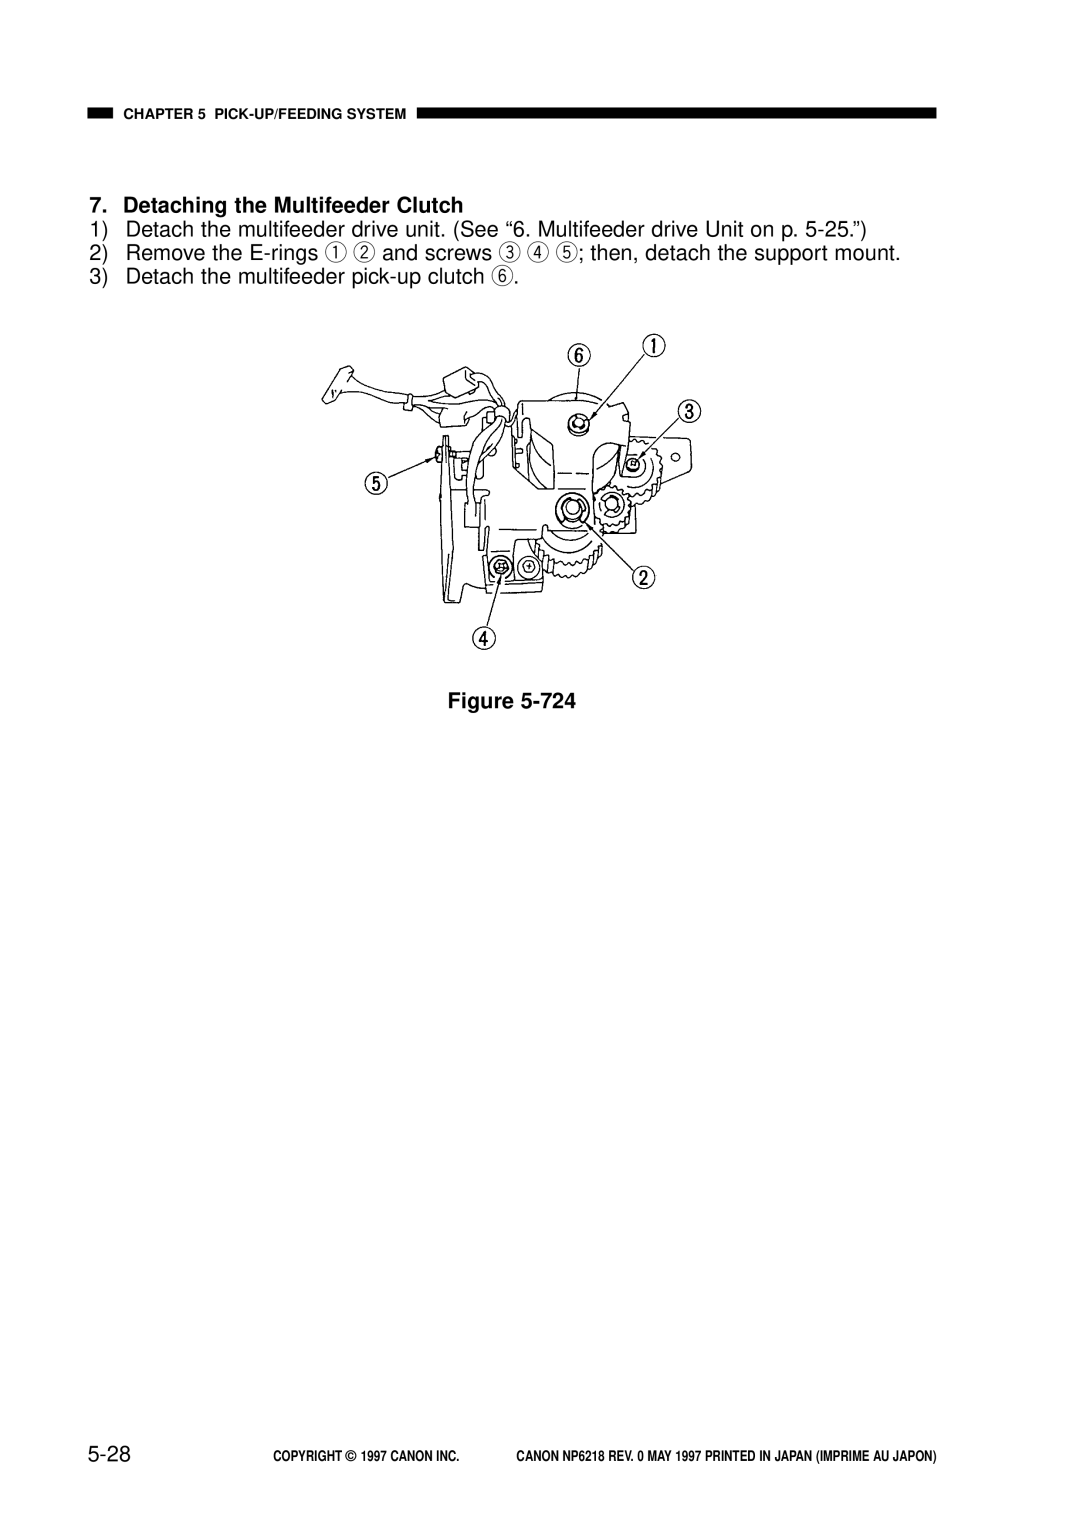 Canon FY8-13EX-000, NP6218 service manual Detaching the Multifeeder Clutch, 5-28 